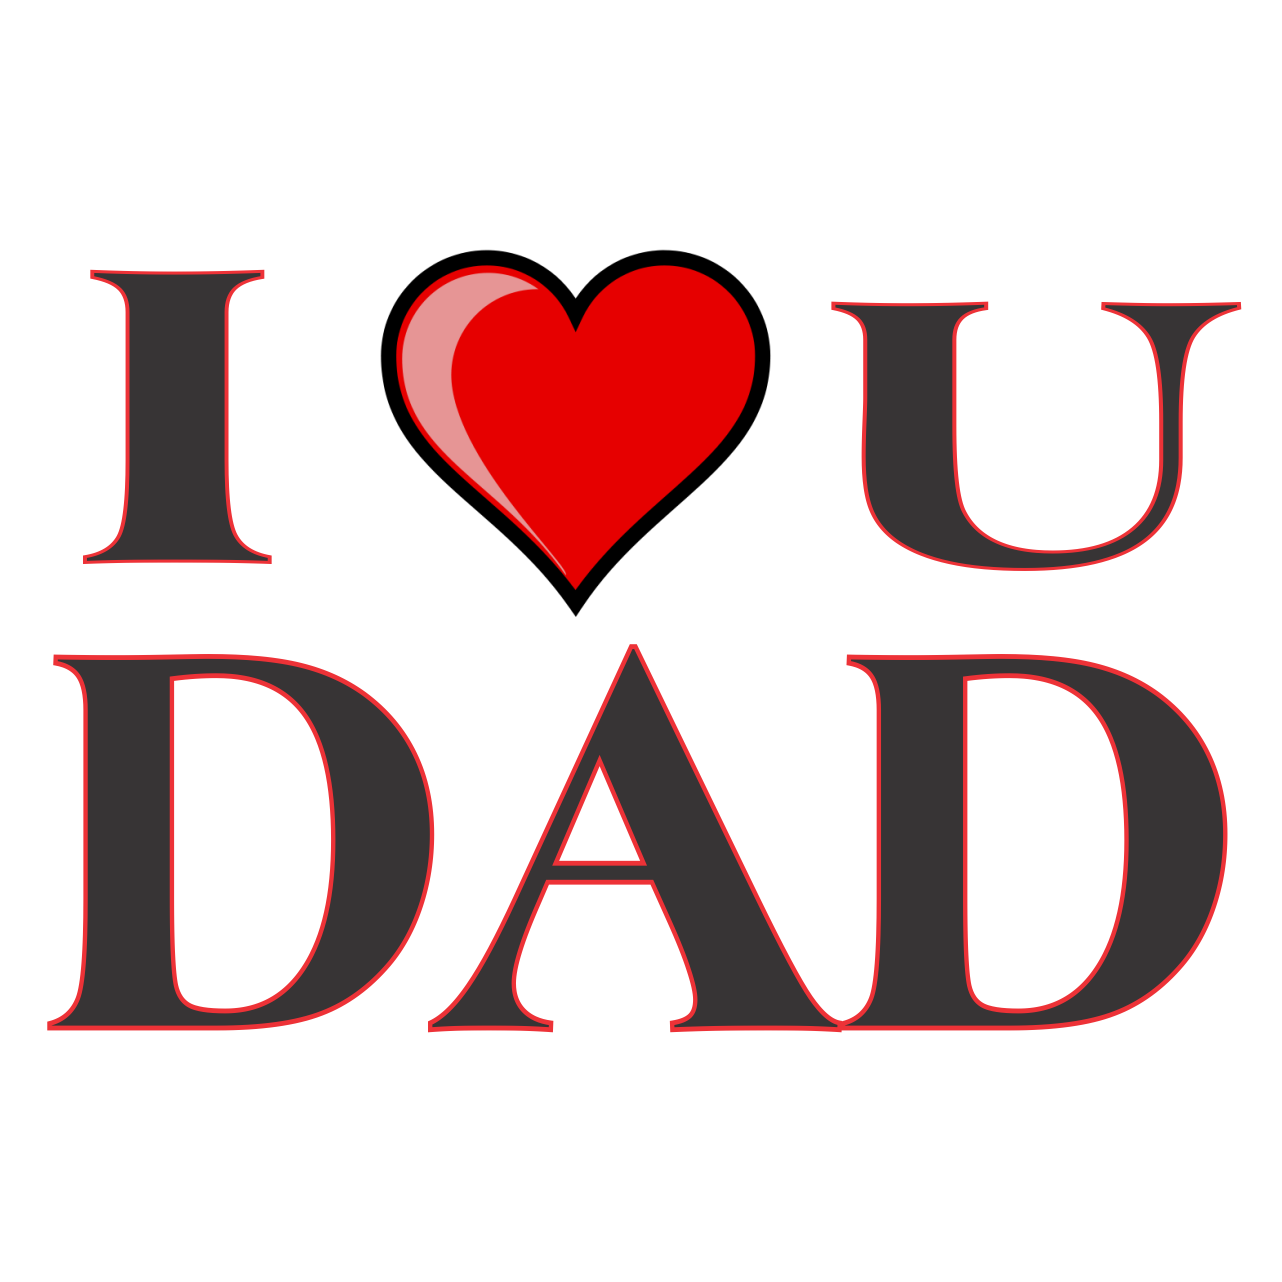 List 100+ Images i love you dad wallpaper Latest